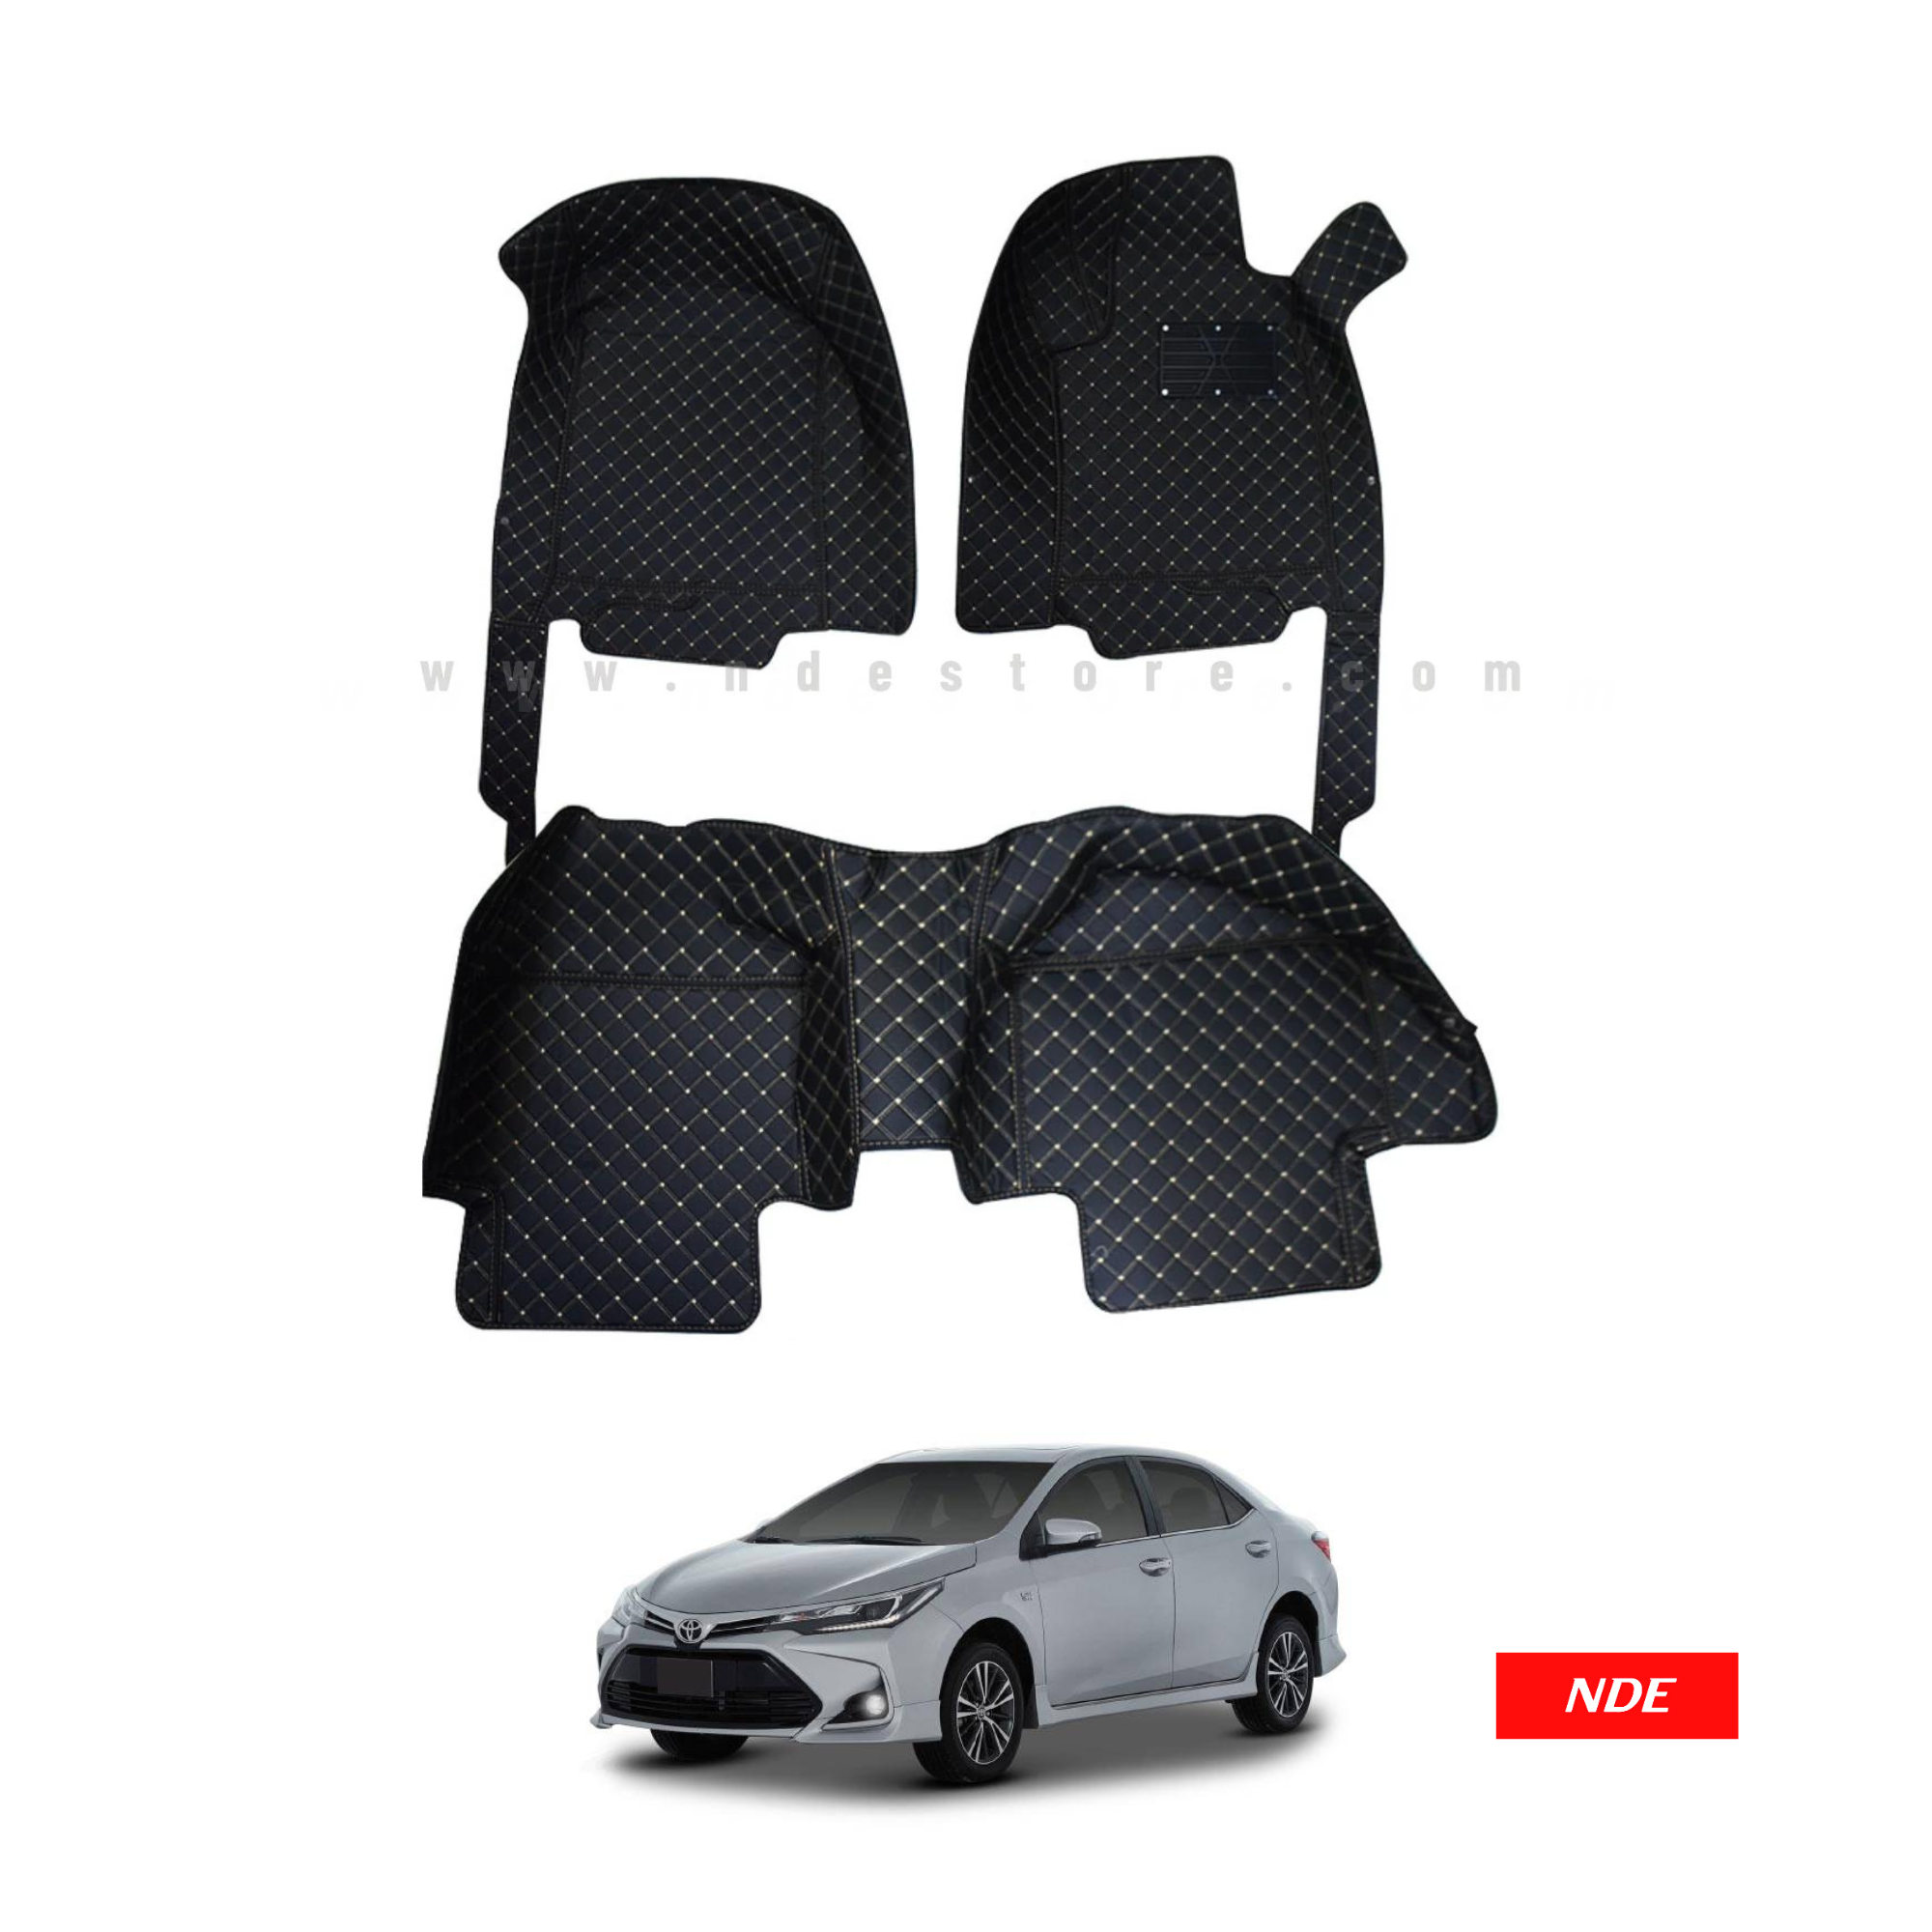 FLOOR MAT 7D STYLE FOR TOYOTA ALTIS X